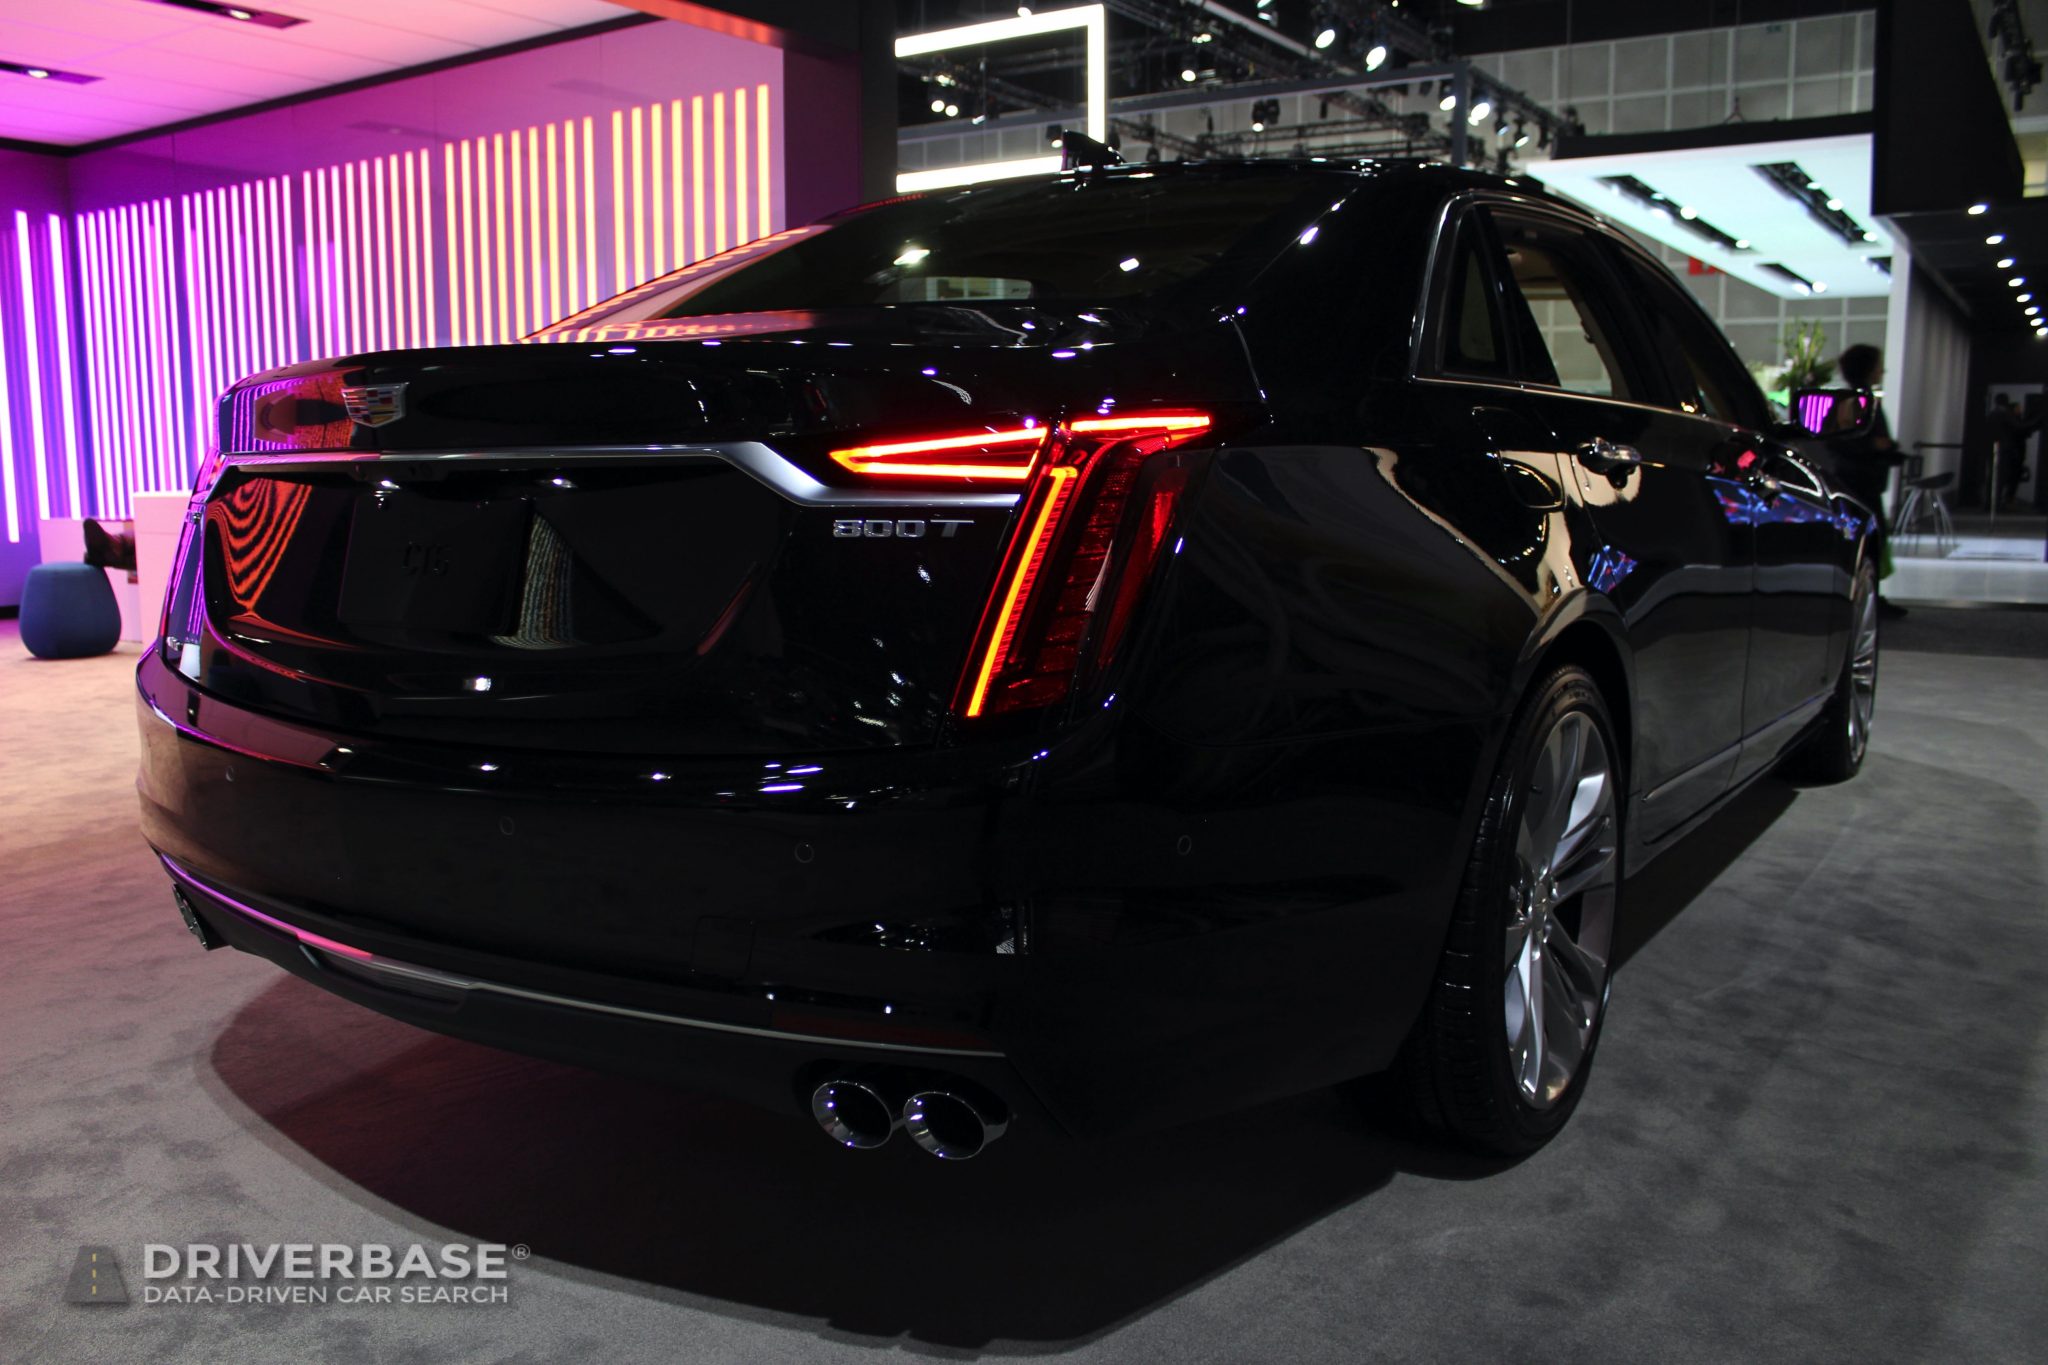 2020 Cadillac CT6 800T at the 2019 Los Angeles Auto Show